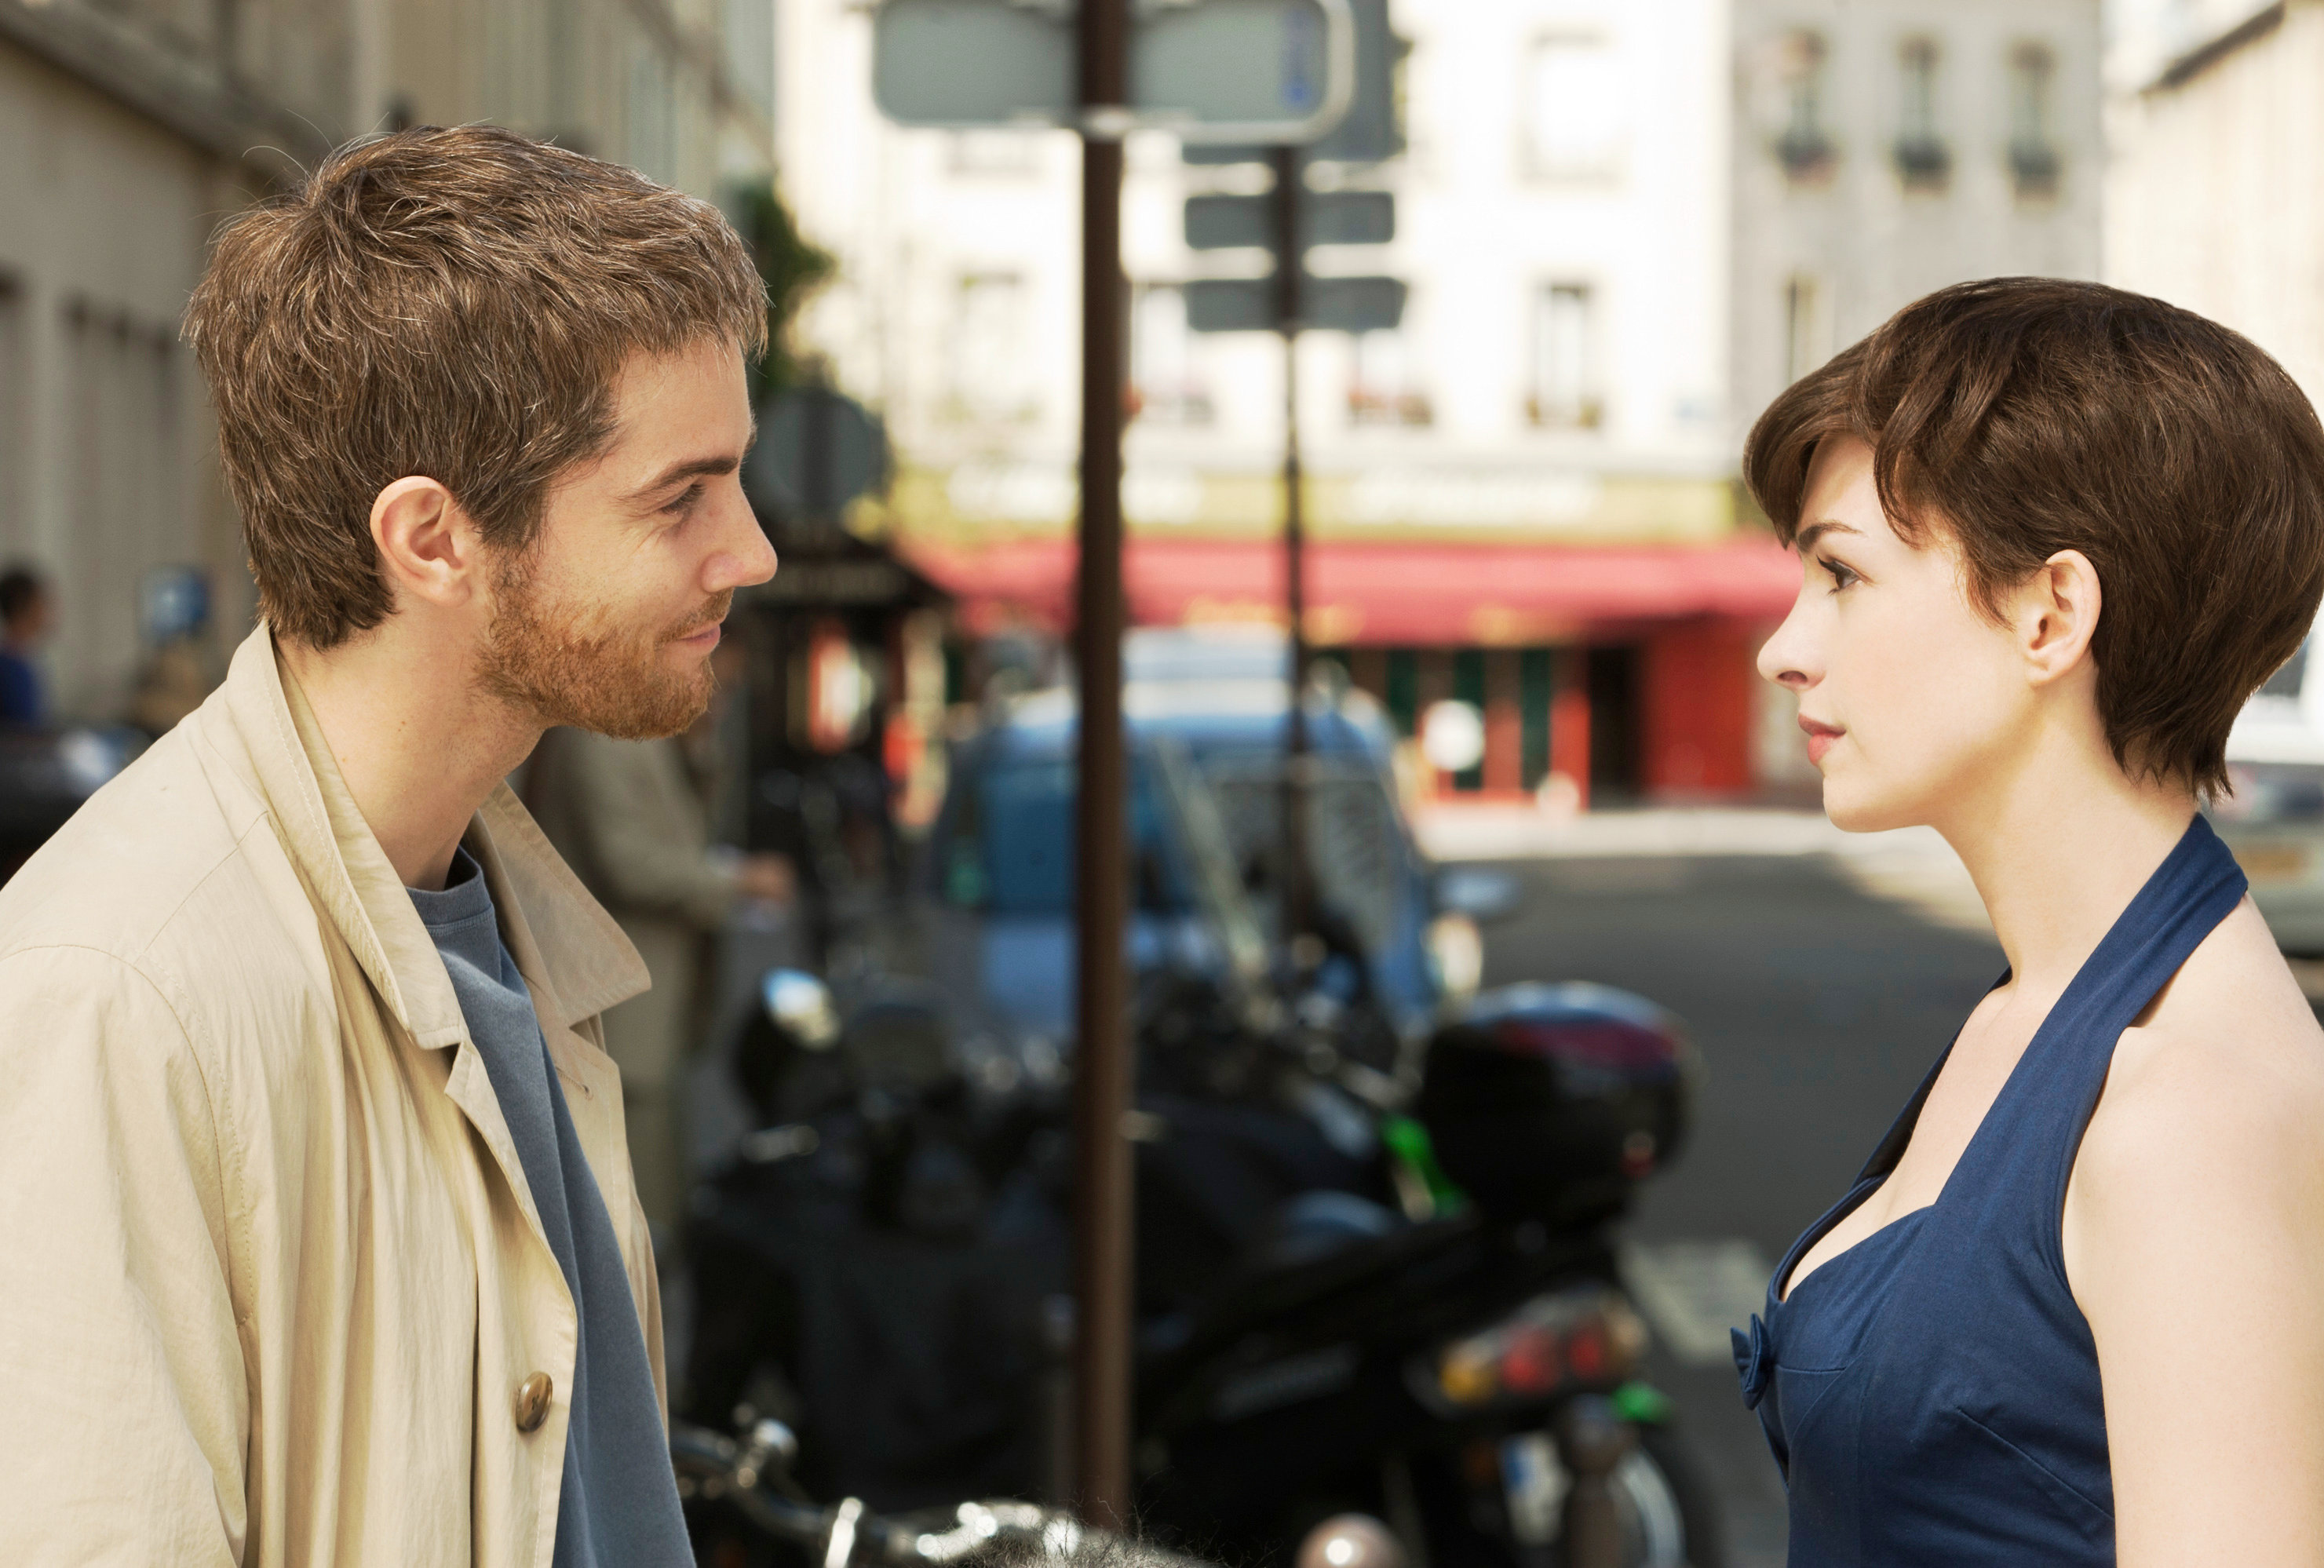 Jim Sturgess stars as Dexter Mayhew and Anne Hathaway stars as Emma Morley in Focus Features' One Day (2011)